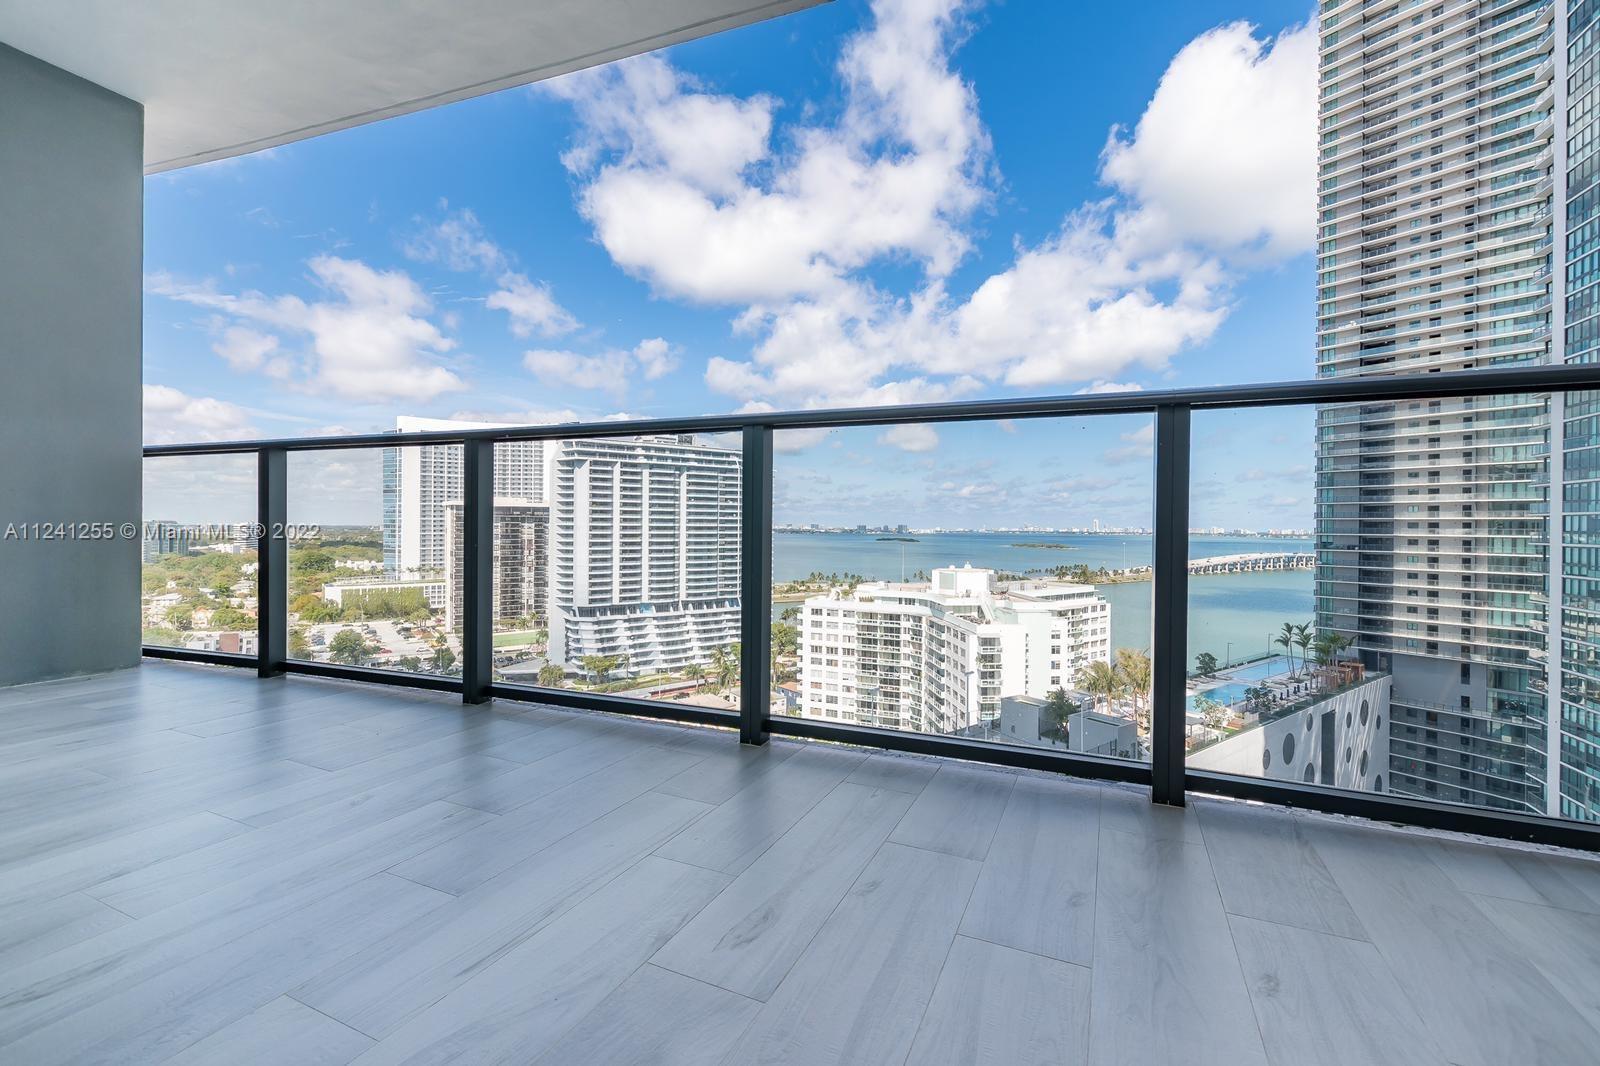 Beautiful one bedroom with one bathroom unit with amazing views of Downtown and Miami Beach skyline from new building in Edgewater. Unit can be rented seasonally once per month. Minutes away from the Design District.. Great amenities with pools, kids club, fitness center, BBQ area, movie theatre, Business Center, the “Amara” restaurant